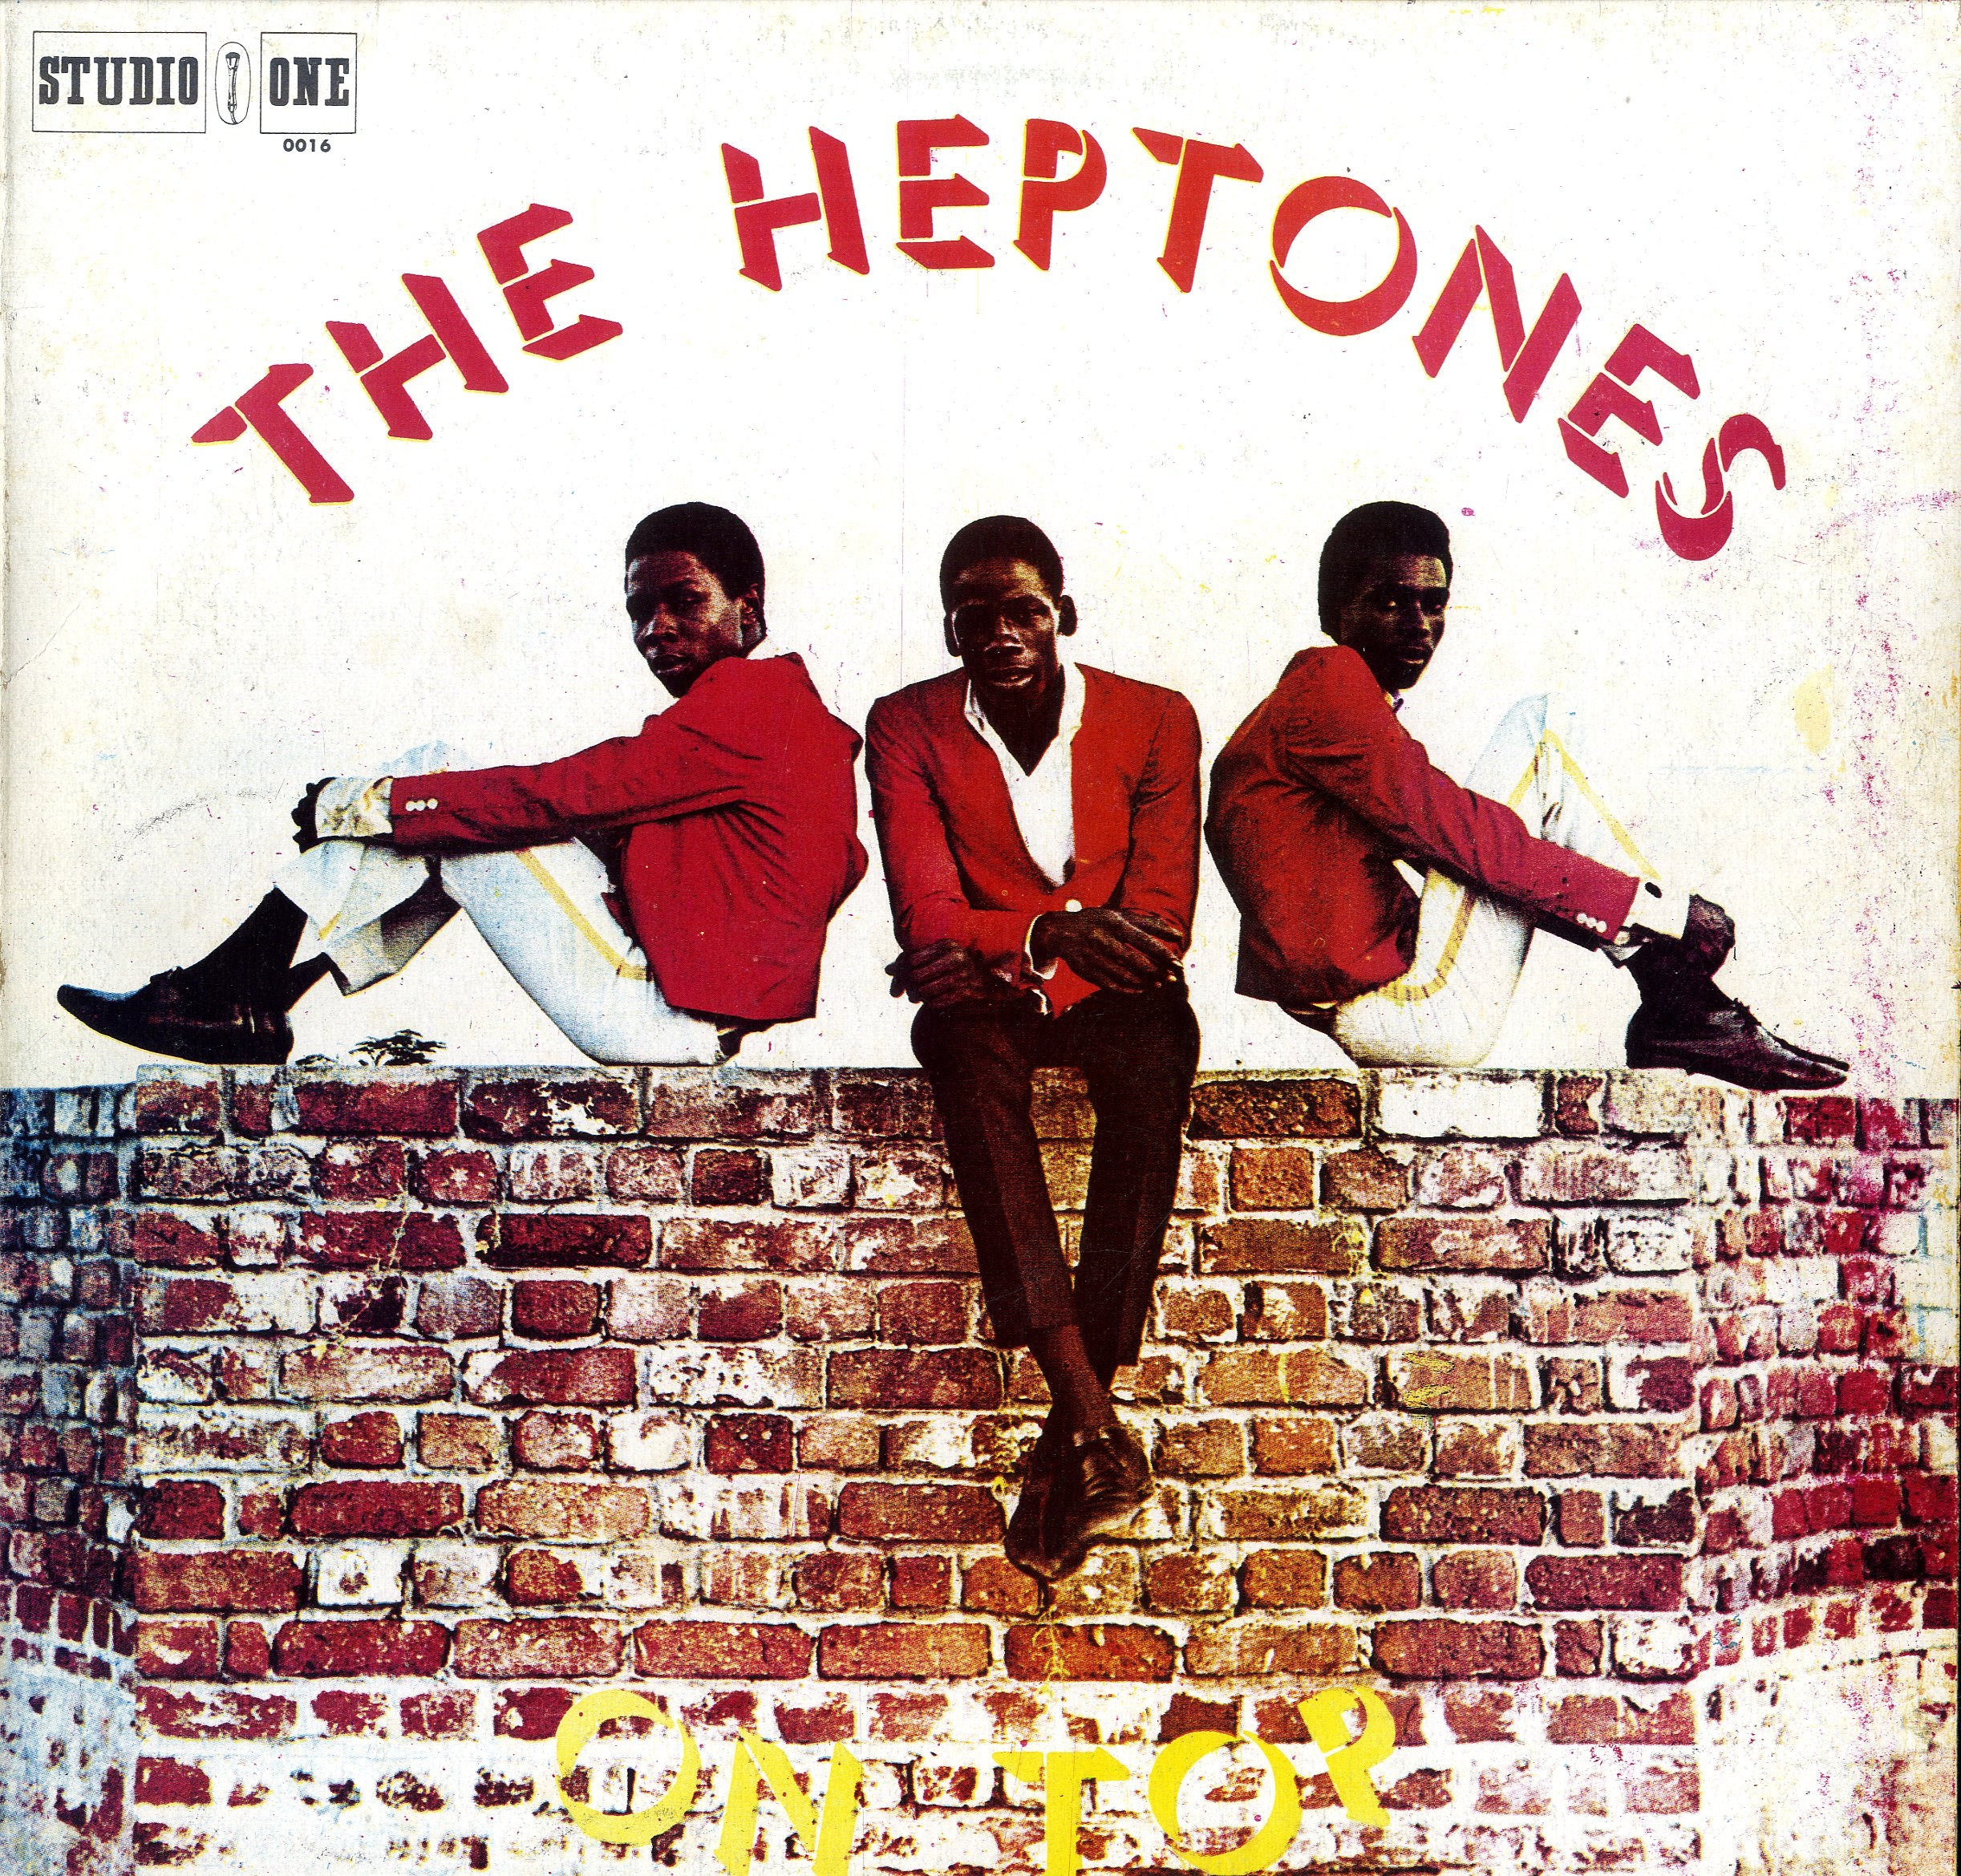 THE HEPTONES [On Top]